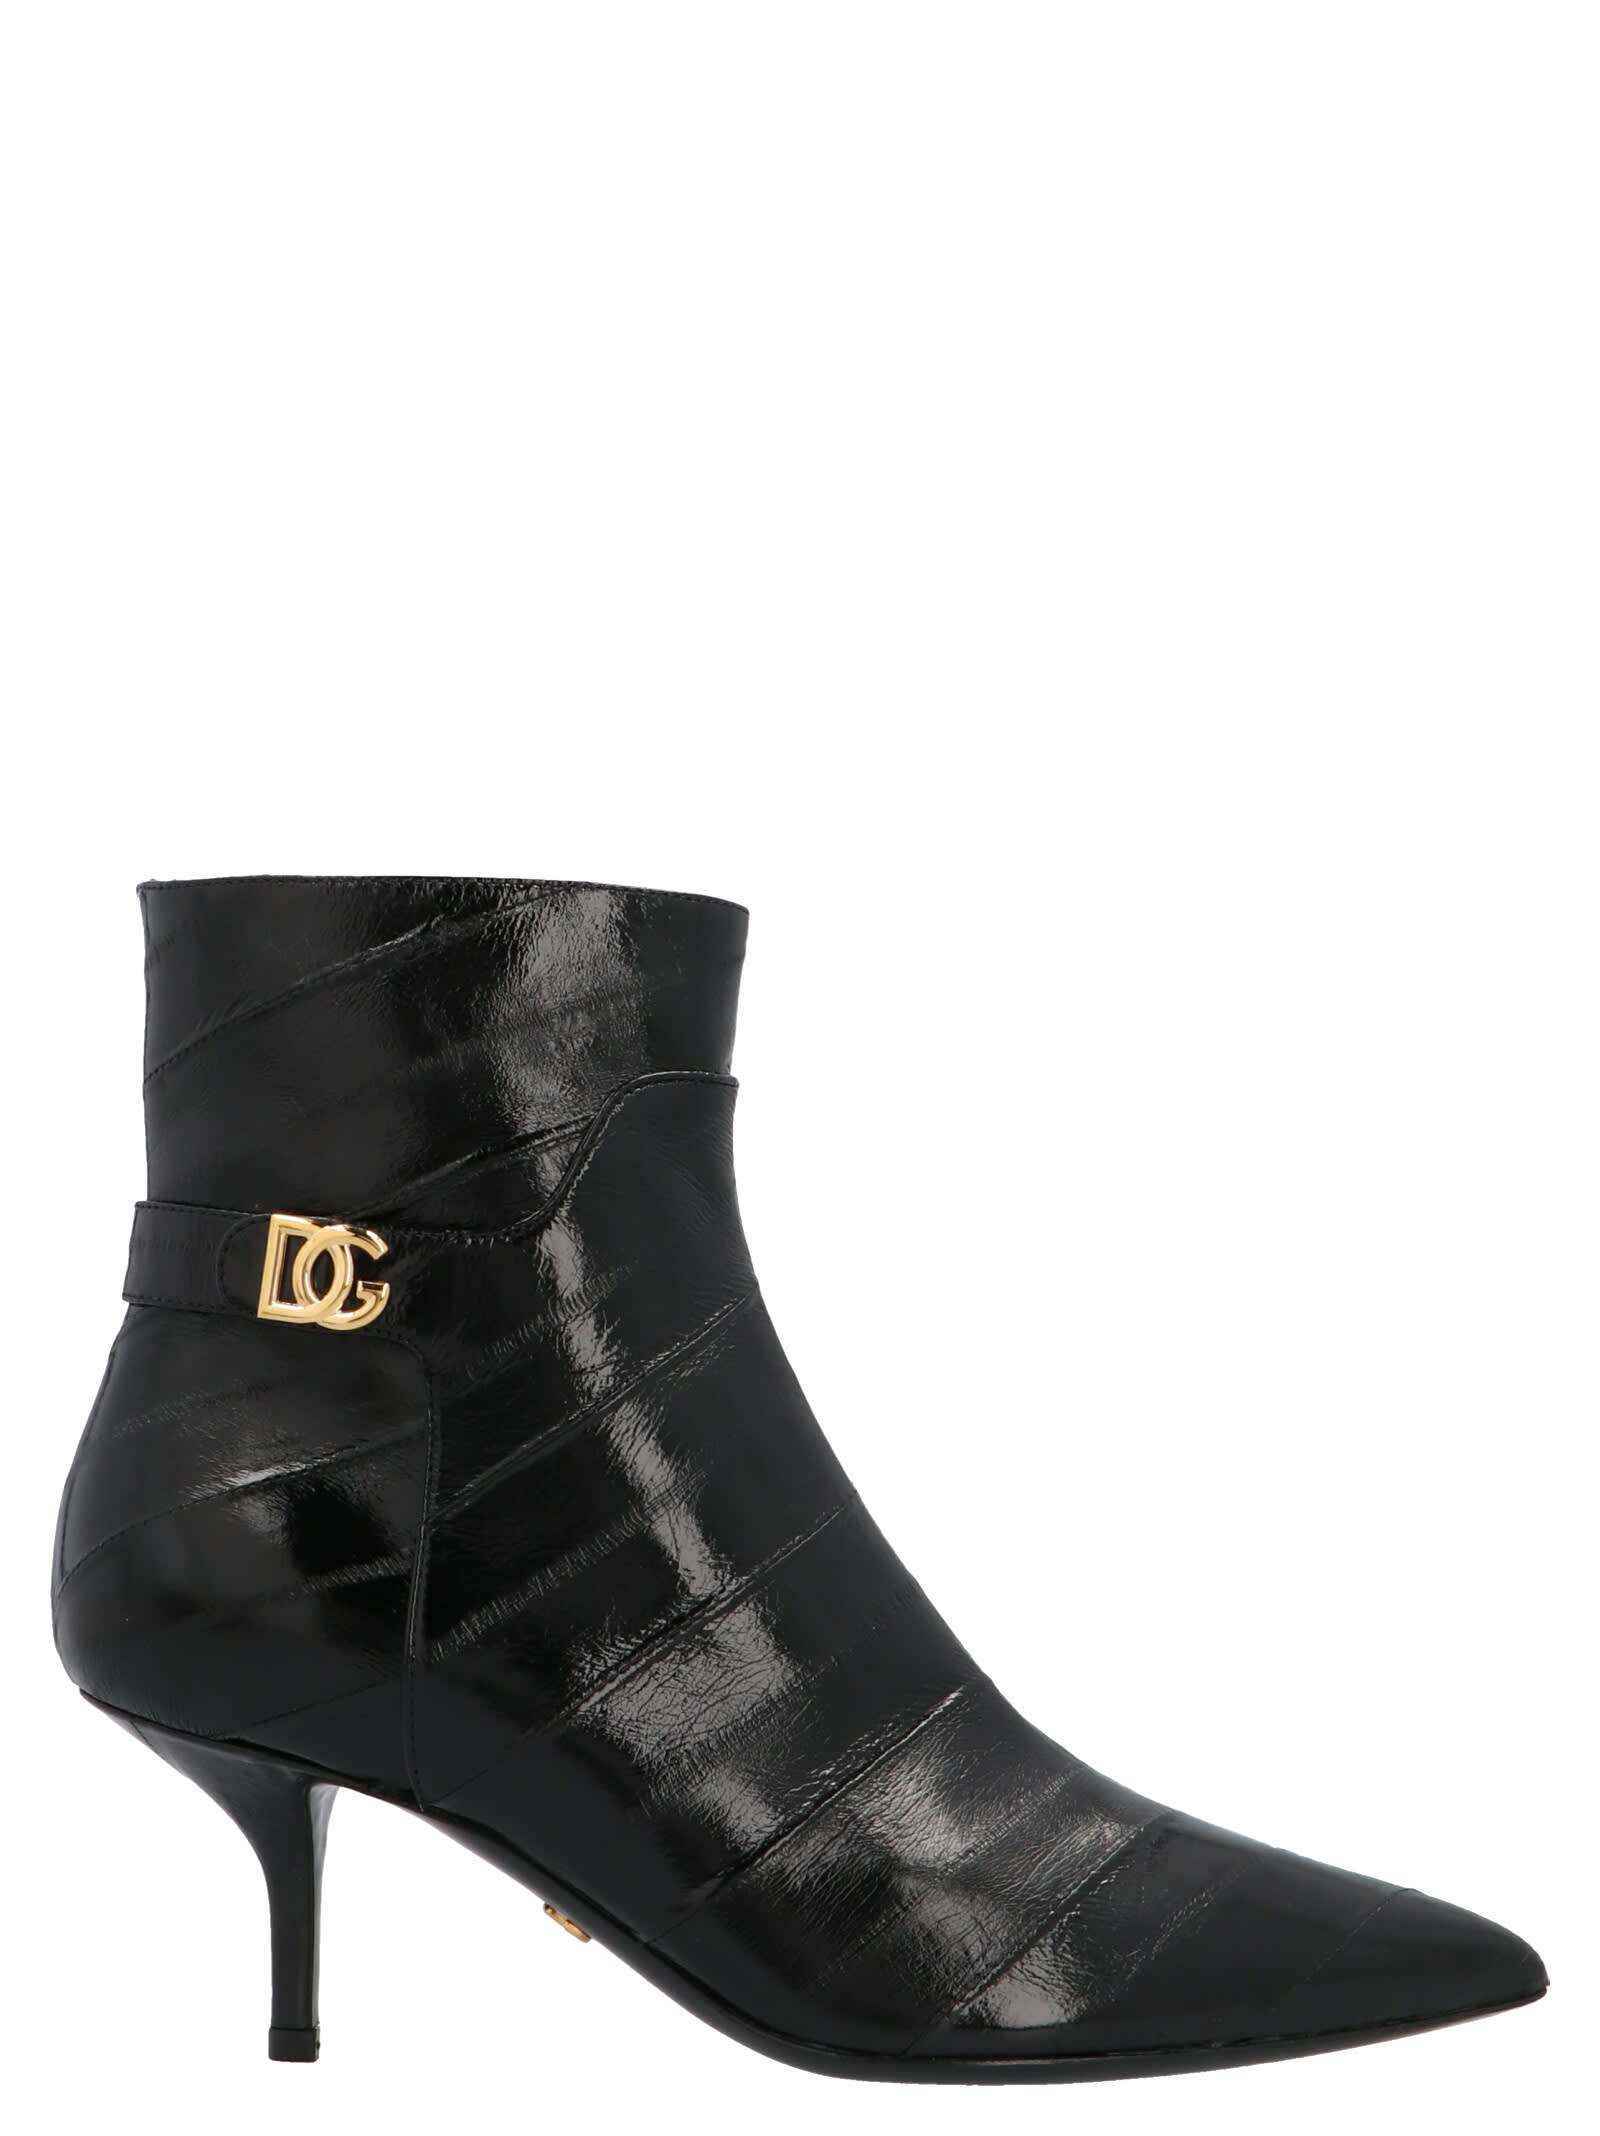 Buy Dolce & Gabbana Point-toe Leather Ankle Boots online, shop Dolce & Gabbana shoes with free shipping